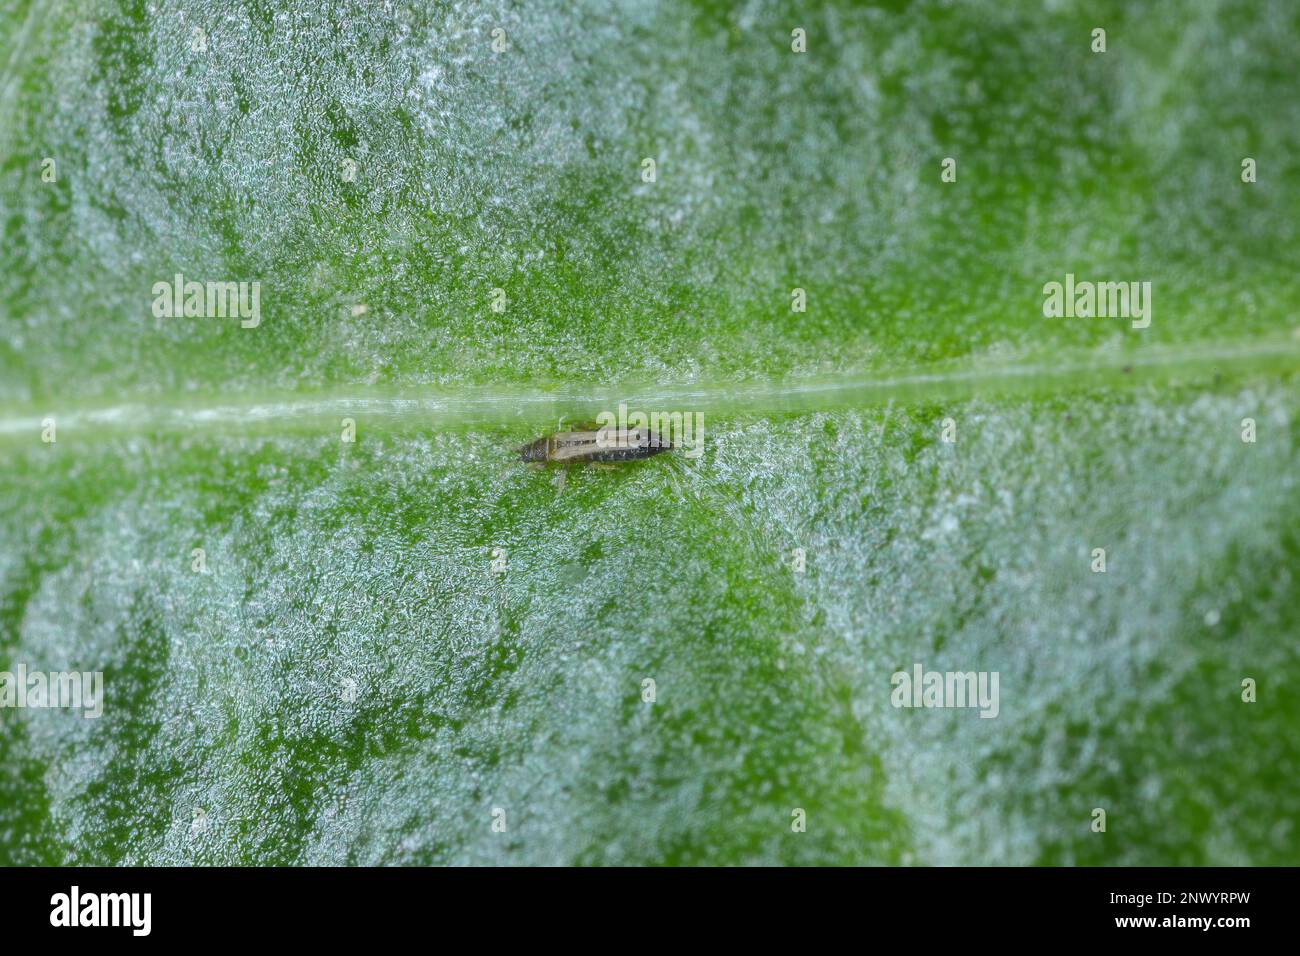 Thrips, thrip Thysanoptera, insecte adulte sur une feuille. Banque D'Images